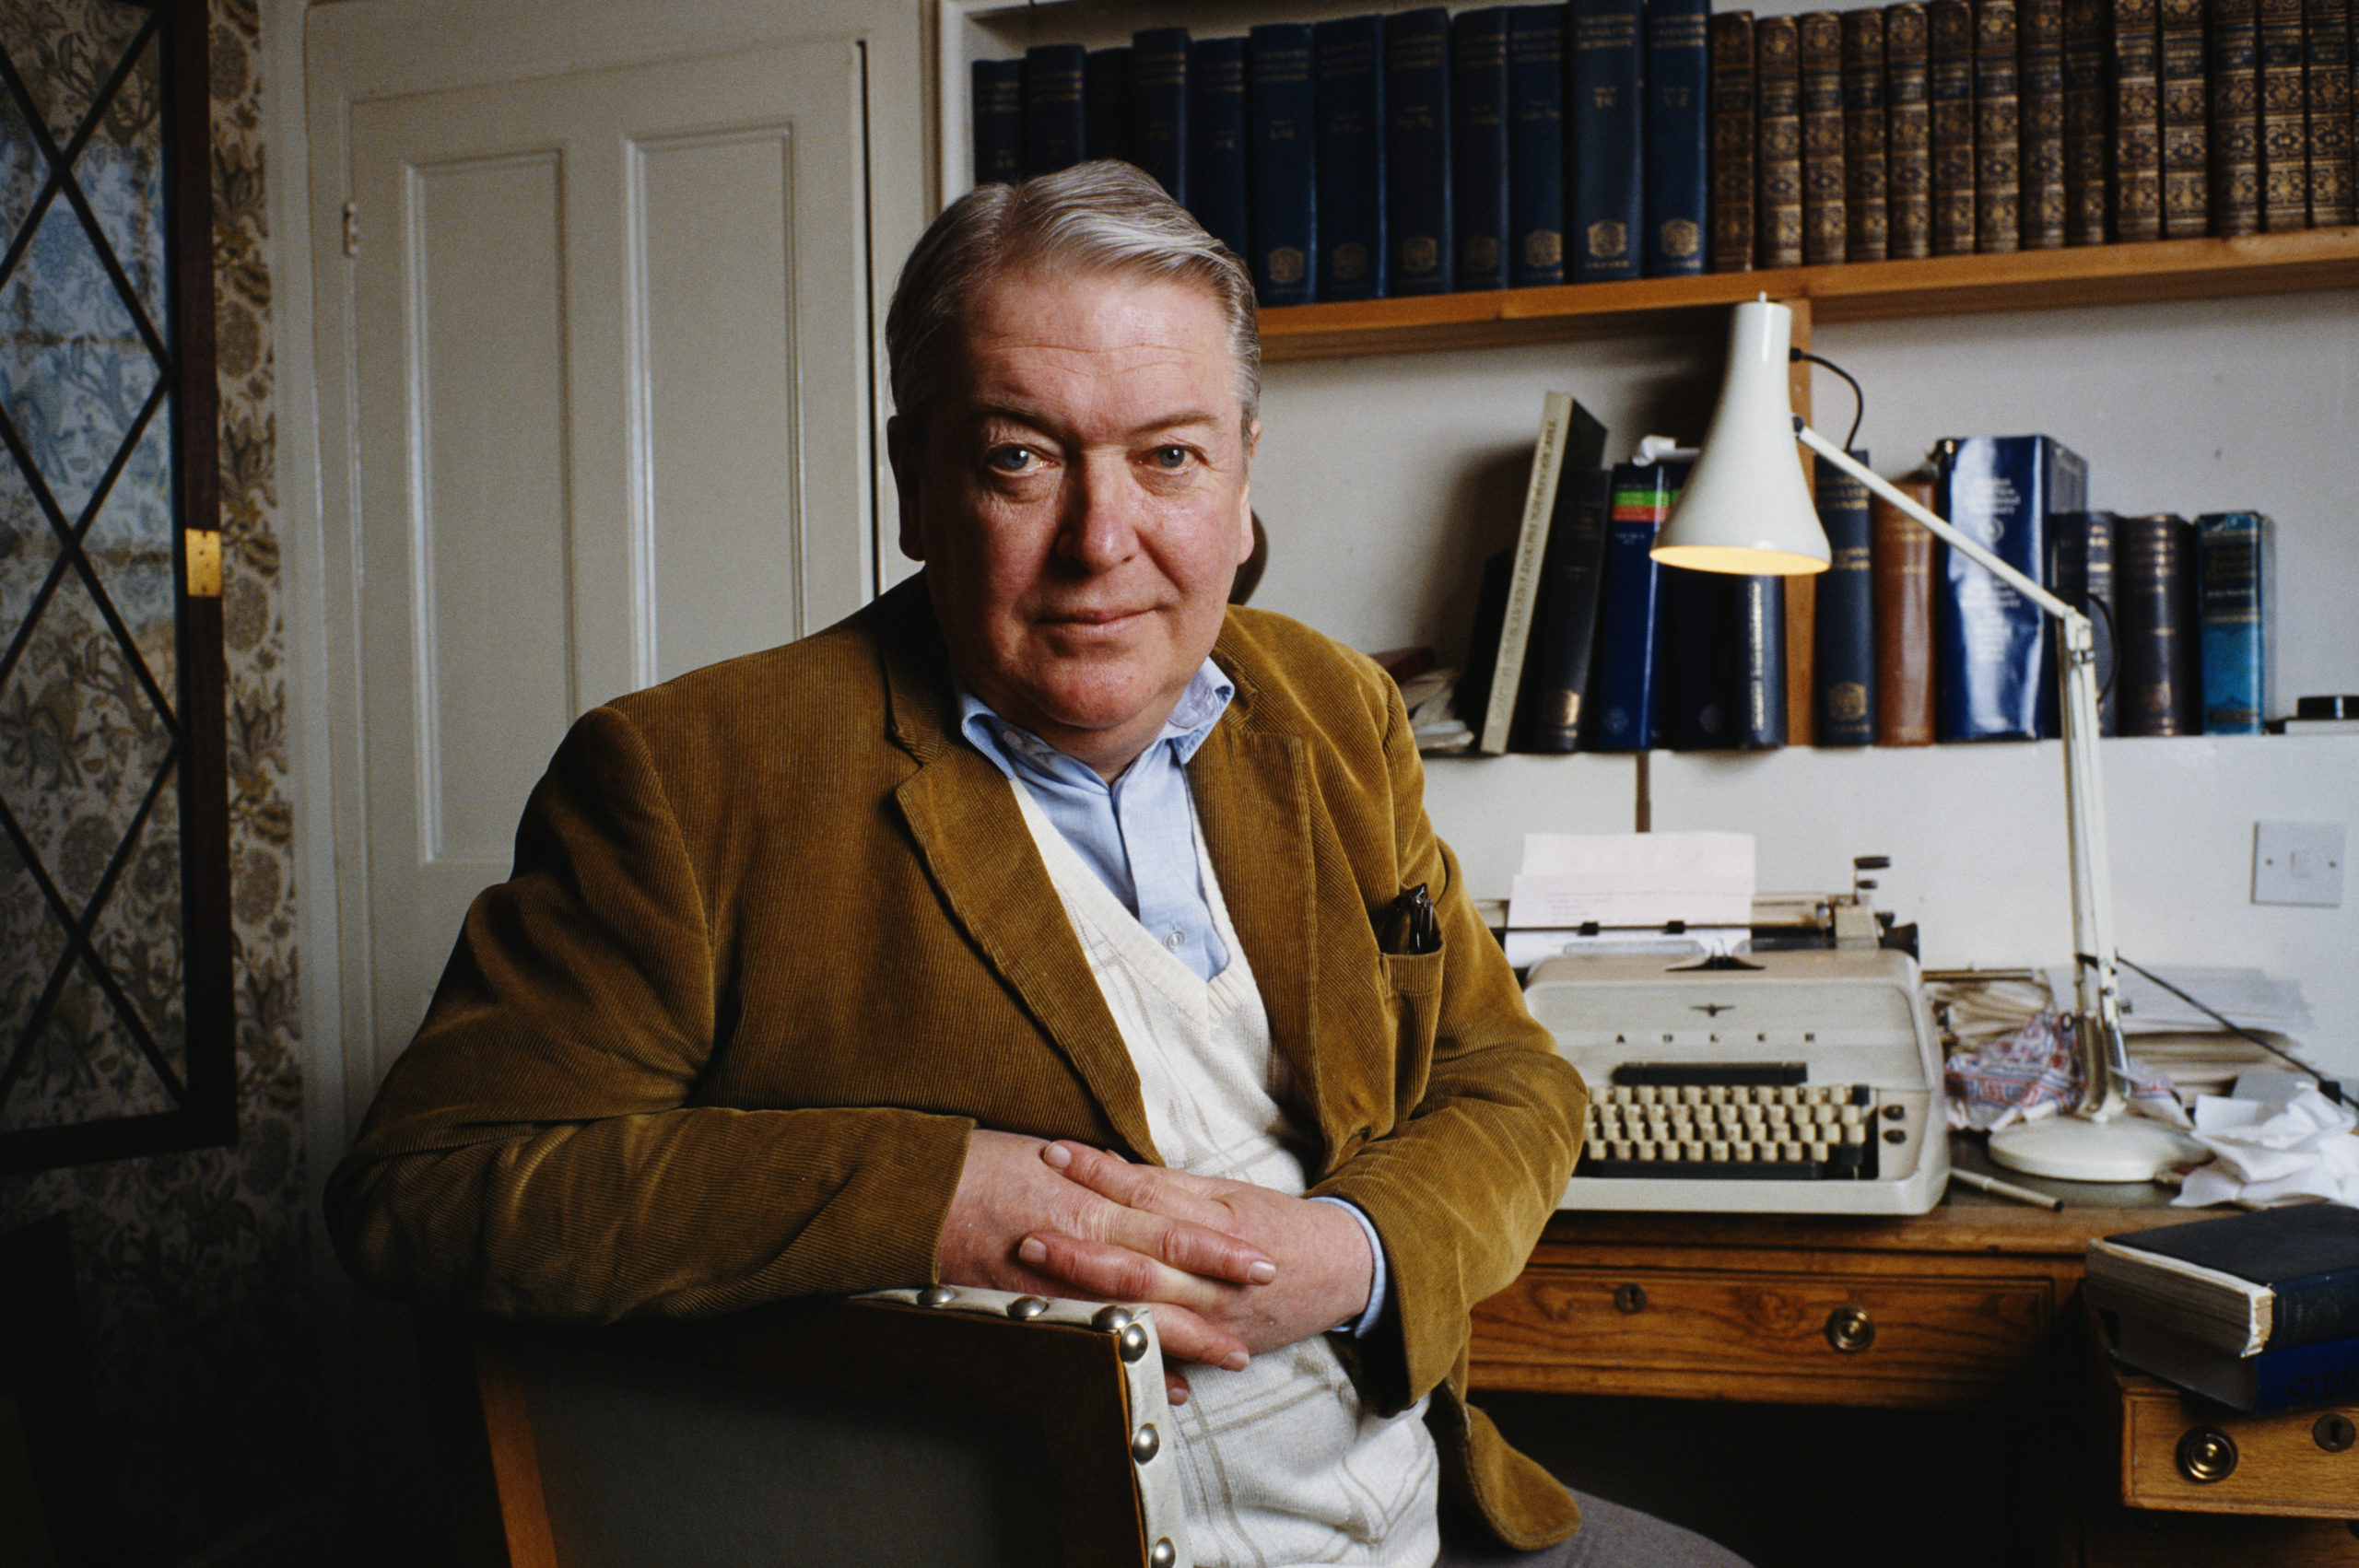 The Old Devil and the Whole Man: Kingsley Amis at 100